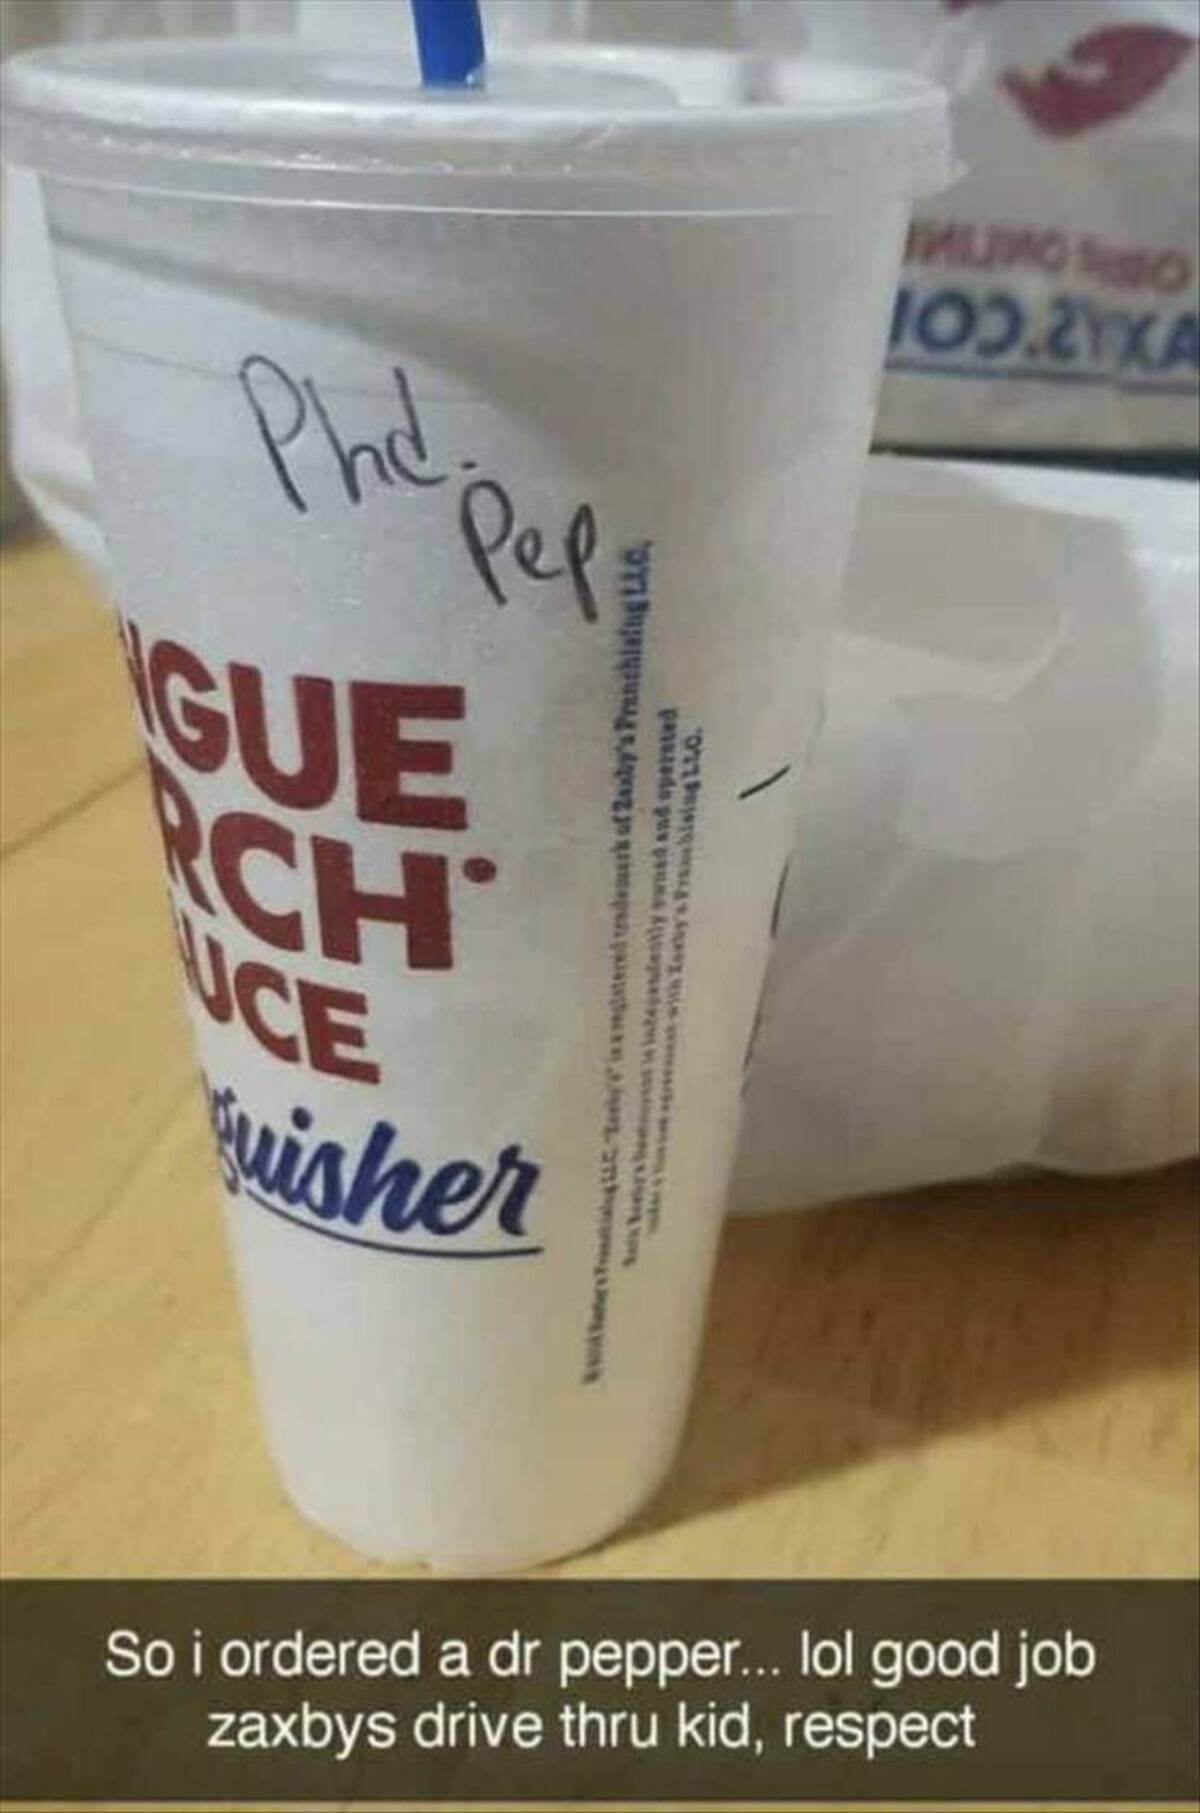 cup - Phat Peli Gue Rch quisher Cistered trademark of Zaxby's Pranchising Llc, textes esently swed and operated Mungo 103.2YXA So i ordered a dr pepper... lol good job zaxbys drive thru kid, respect